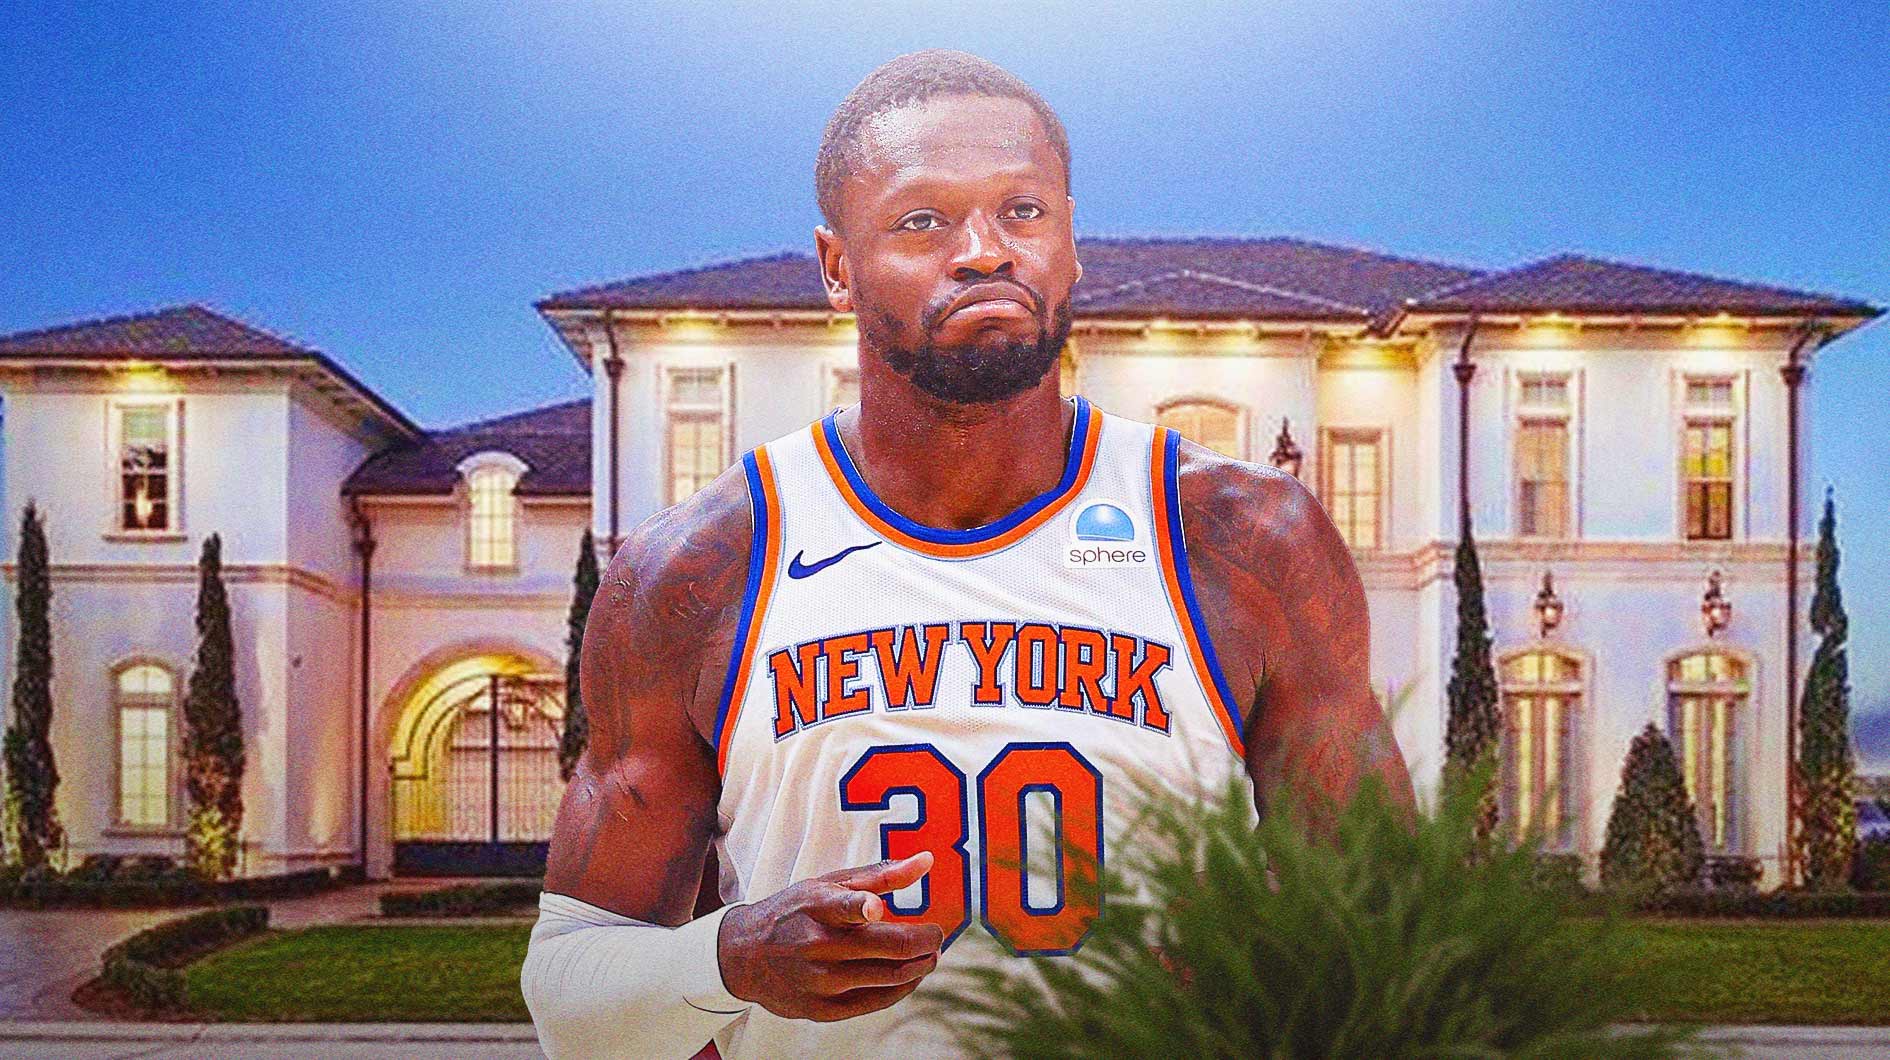 The New York Knicks' Julius Randle in front of his former mansion in Louisiana.